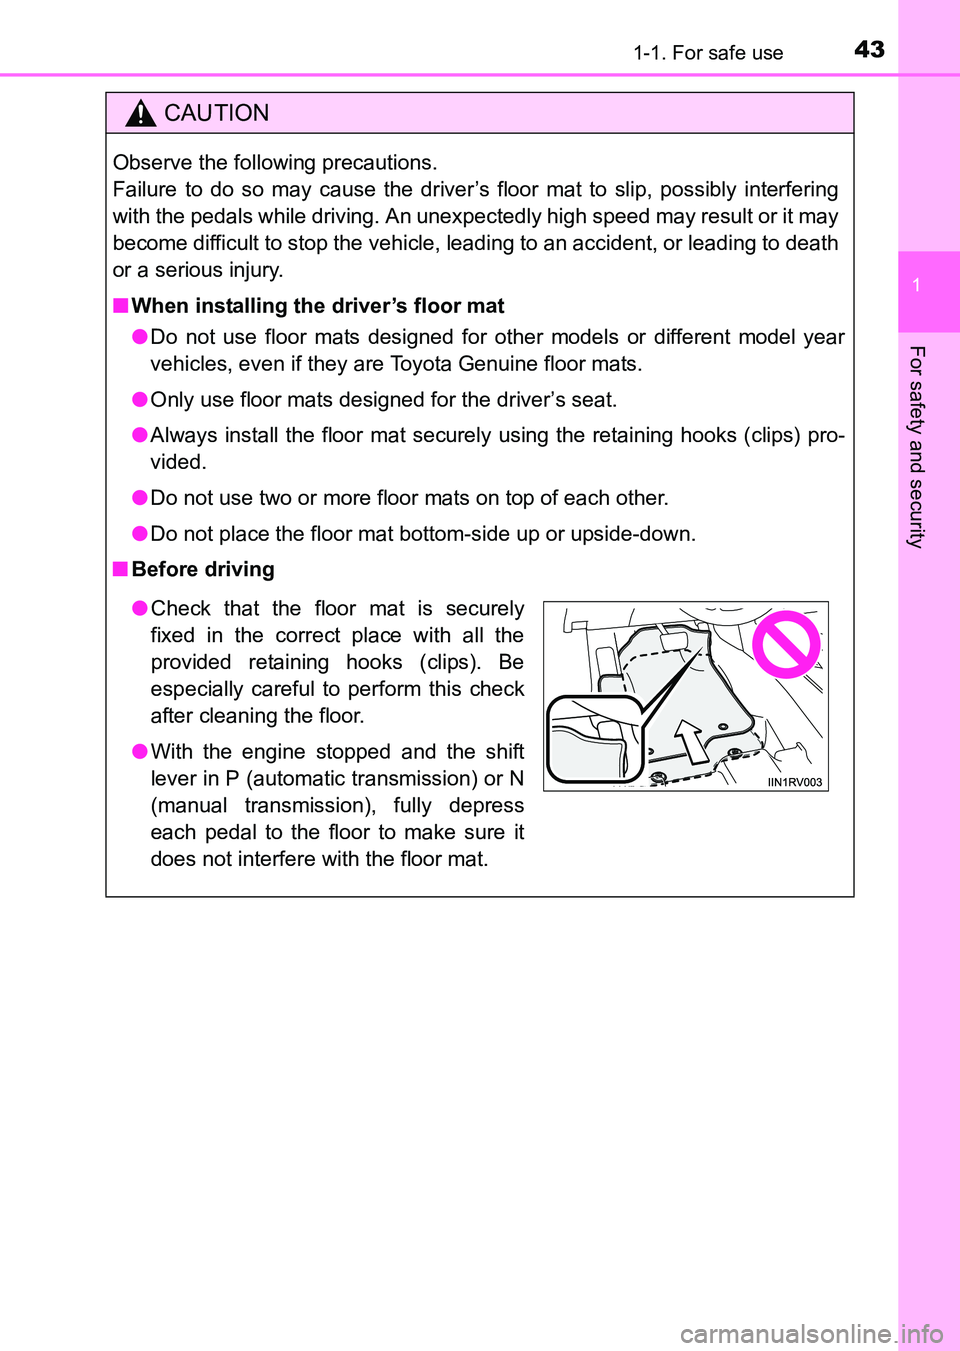 TOYOTA HILUX 2015  Owners Manual (in English) 431-1. For safe use
1
HILUX_OM_OM0K219E_(EE)
For safety and security
CAUTION
Observe the following precautions. 
Failure to do so may cause the driver’s floor mat to slip, possibly interfering
with 